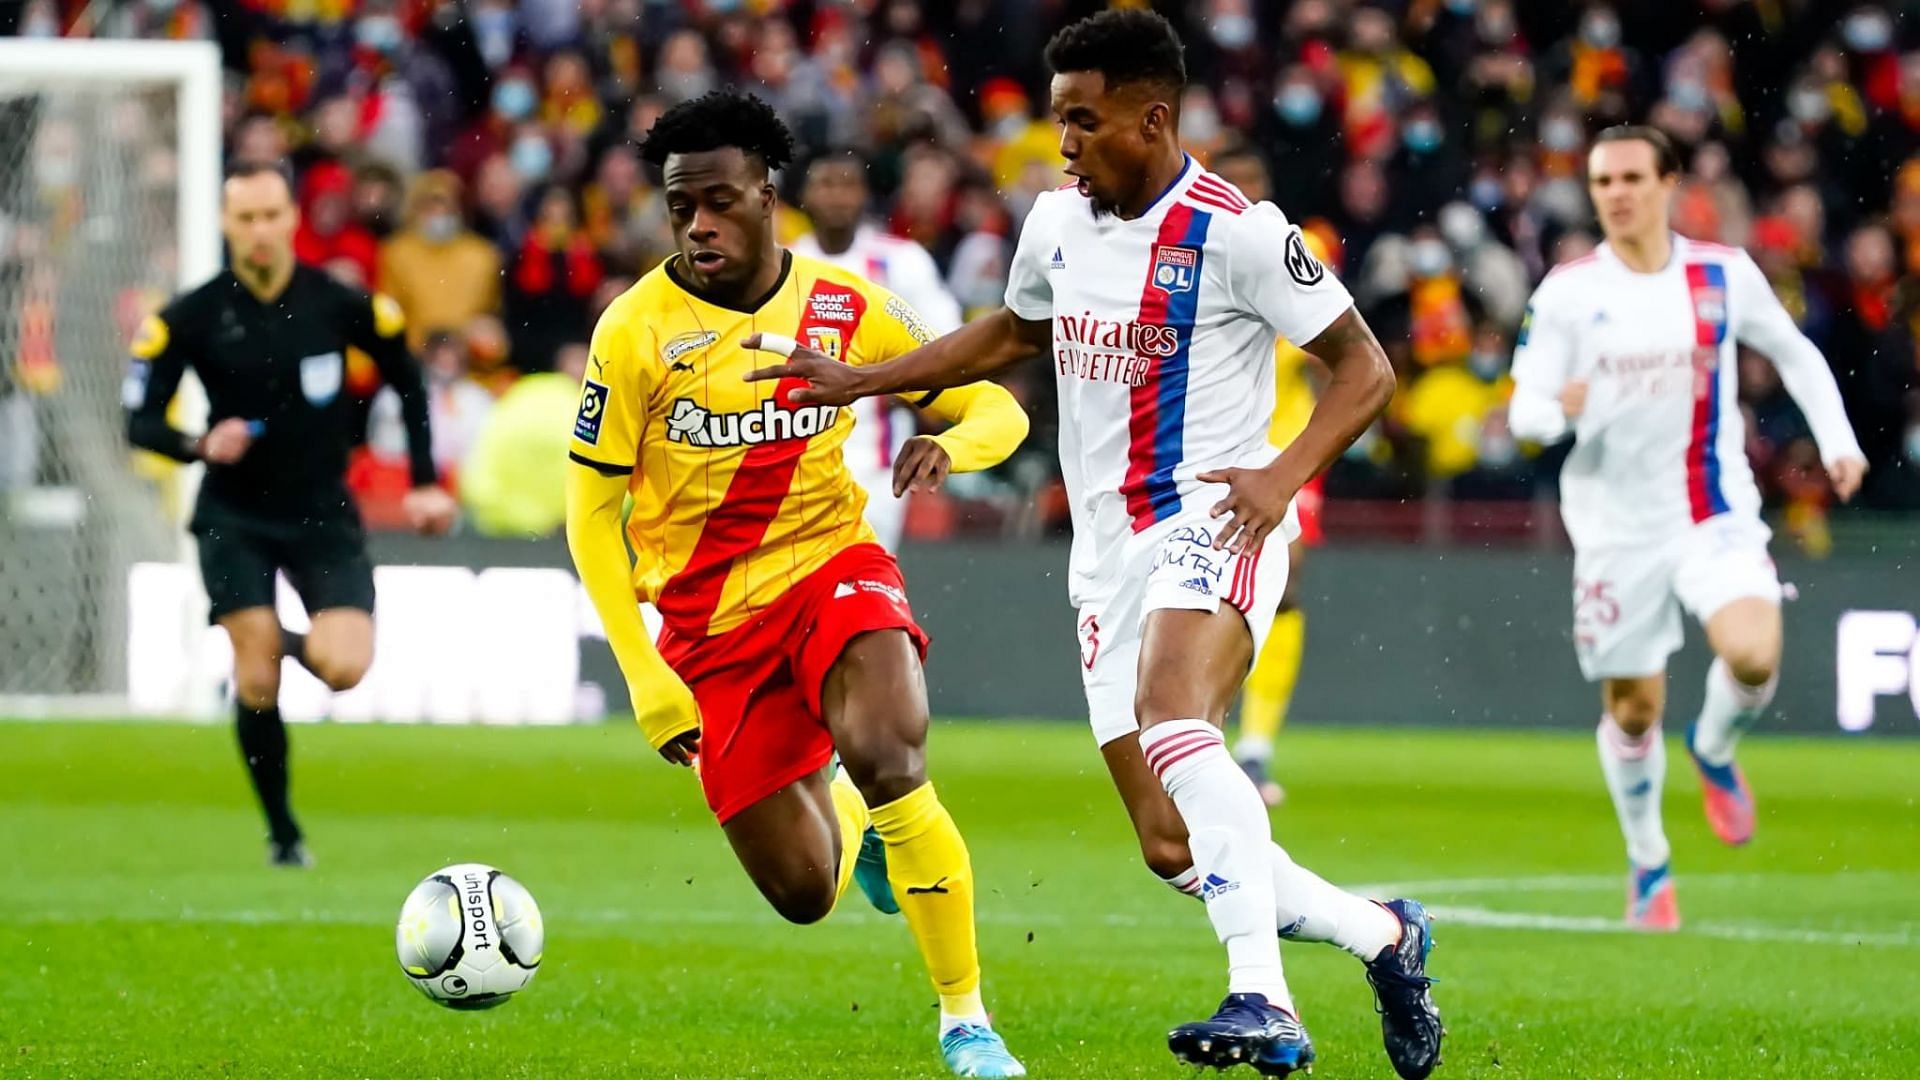 Lyon and Lens are set to meet in Ligue 1 on Sunday